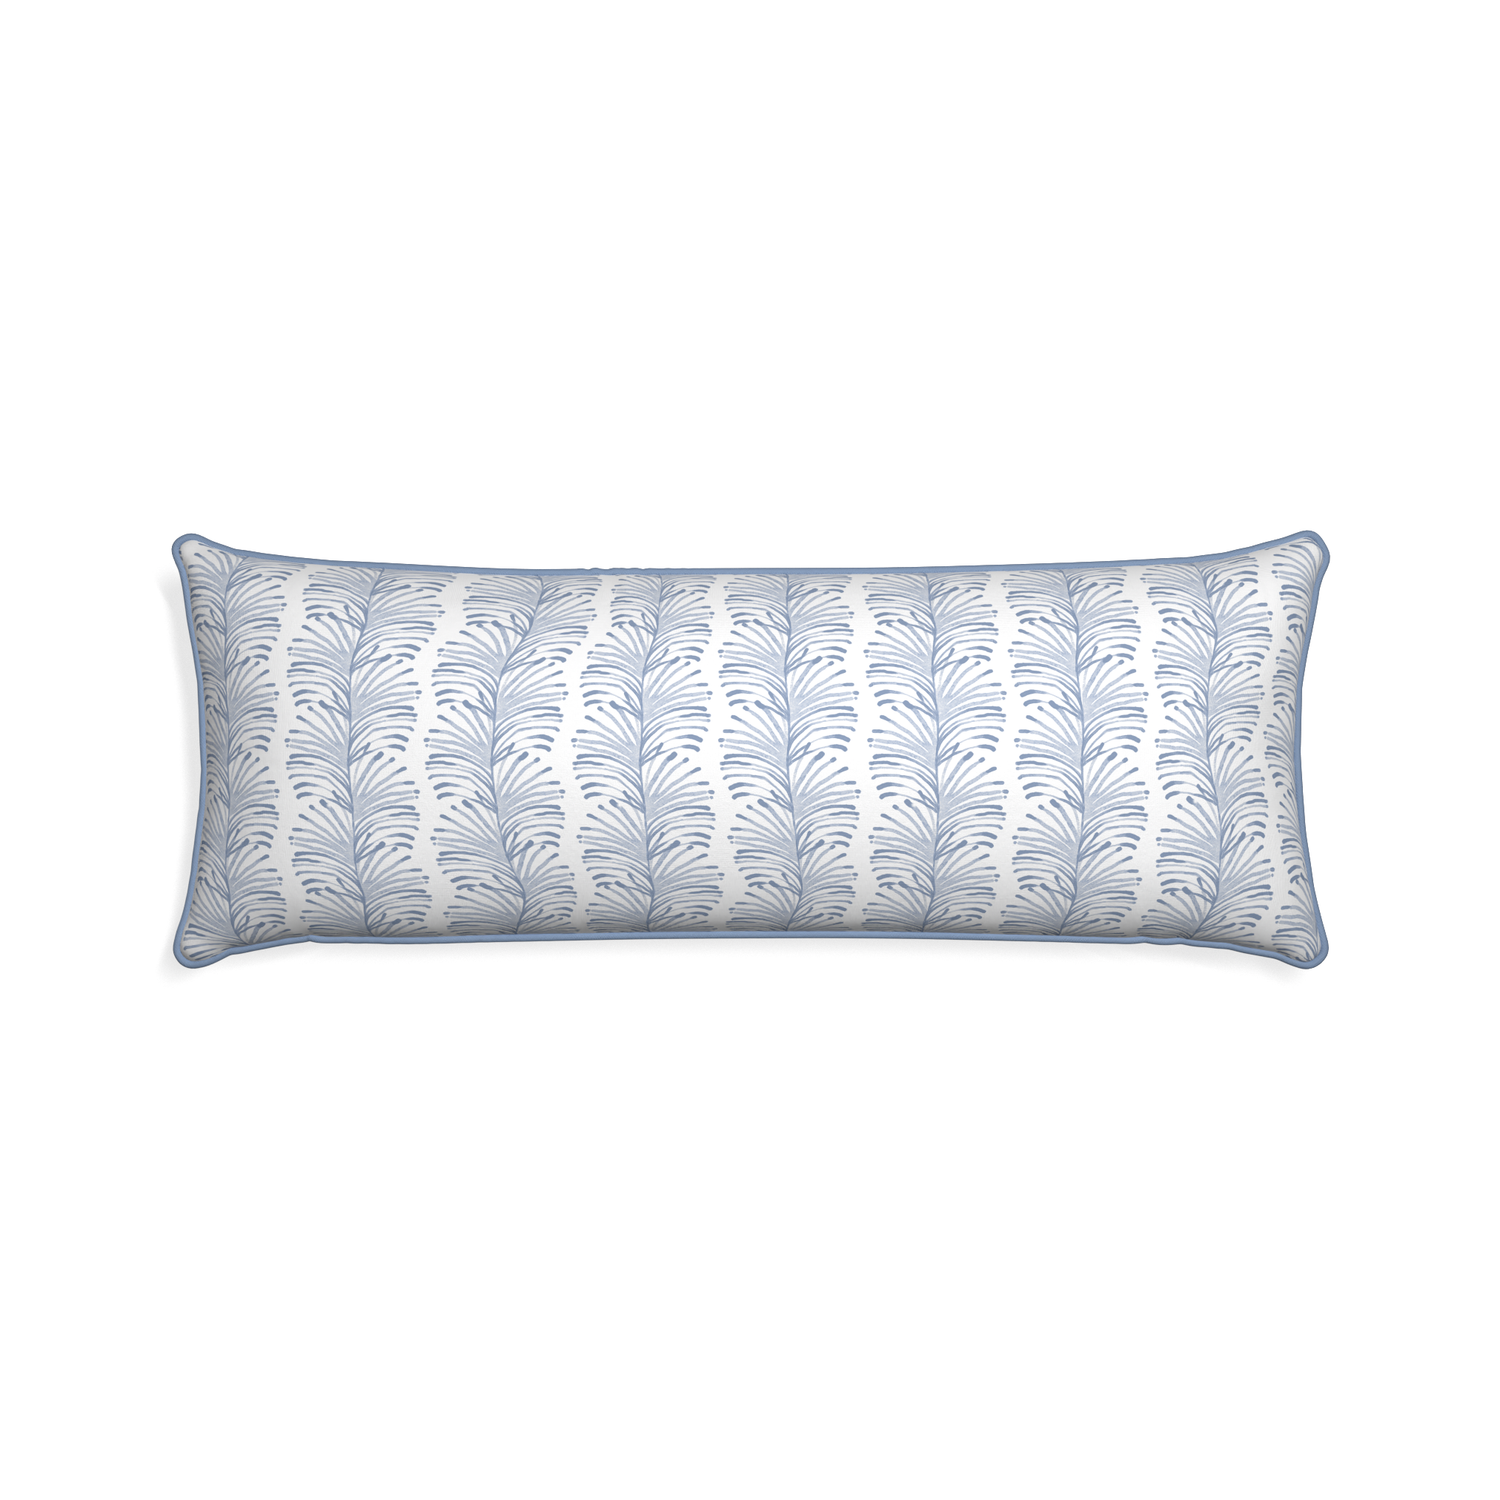 Xl-lumbar emma sky custom pillow with sky piping on white background